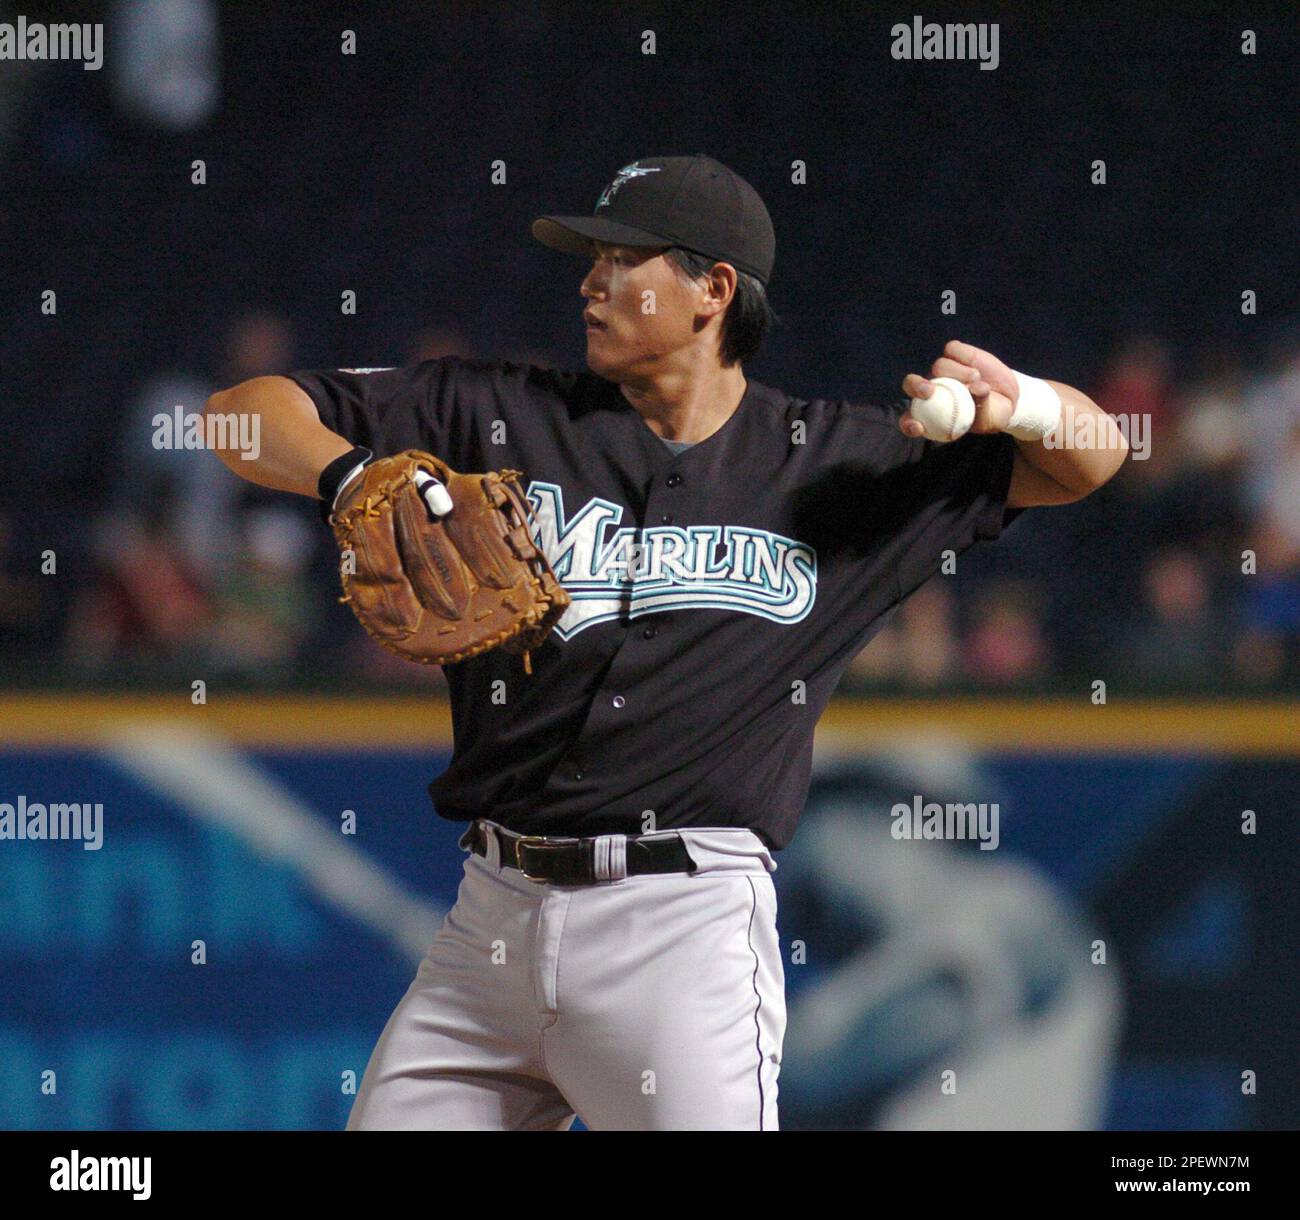 Florida Marlins first baseman Hee Seop Choi, of South Korea, warms up  during the first inning, Monday, June 28, 2004, at Turner Field in Atlanta.  (AP Photo/Gregory Smith Stock Photo - Alamy